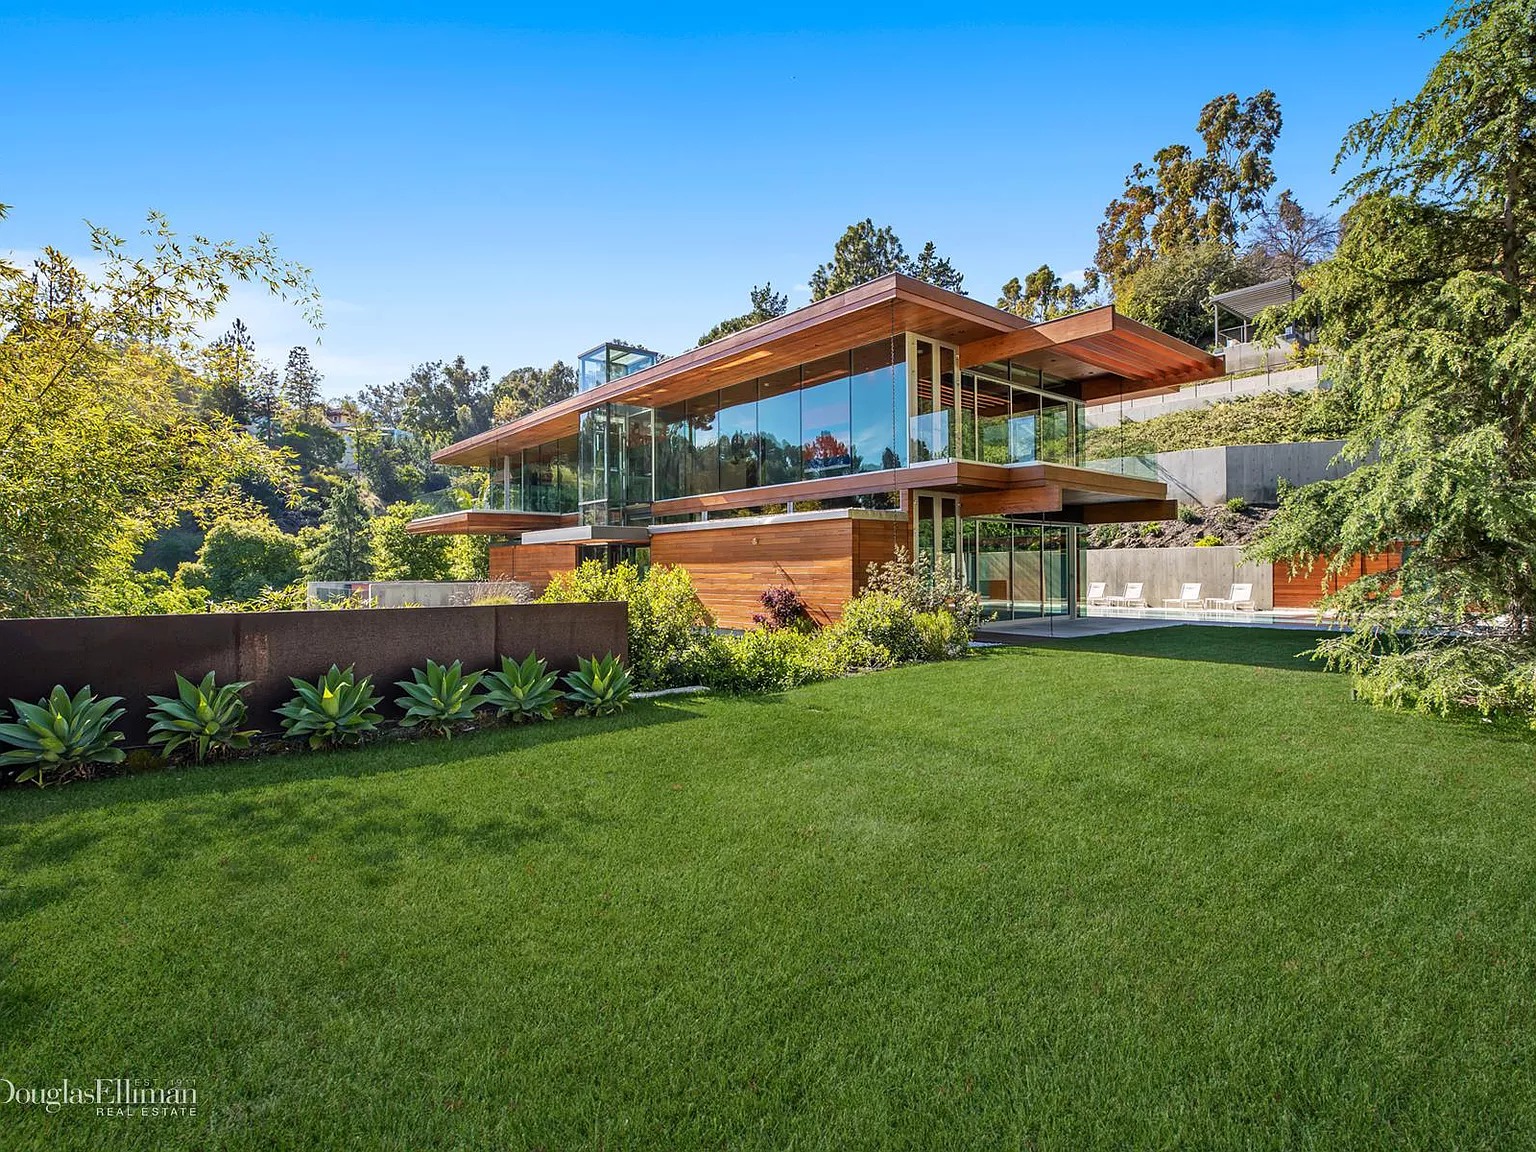 1160 San Ysidro Dr, Beverly Hills, CA 90210 - $19,950,000 home for sale, house images, photos and pics gallery